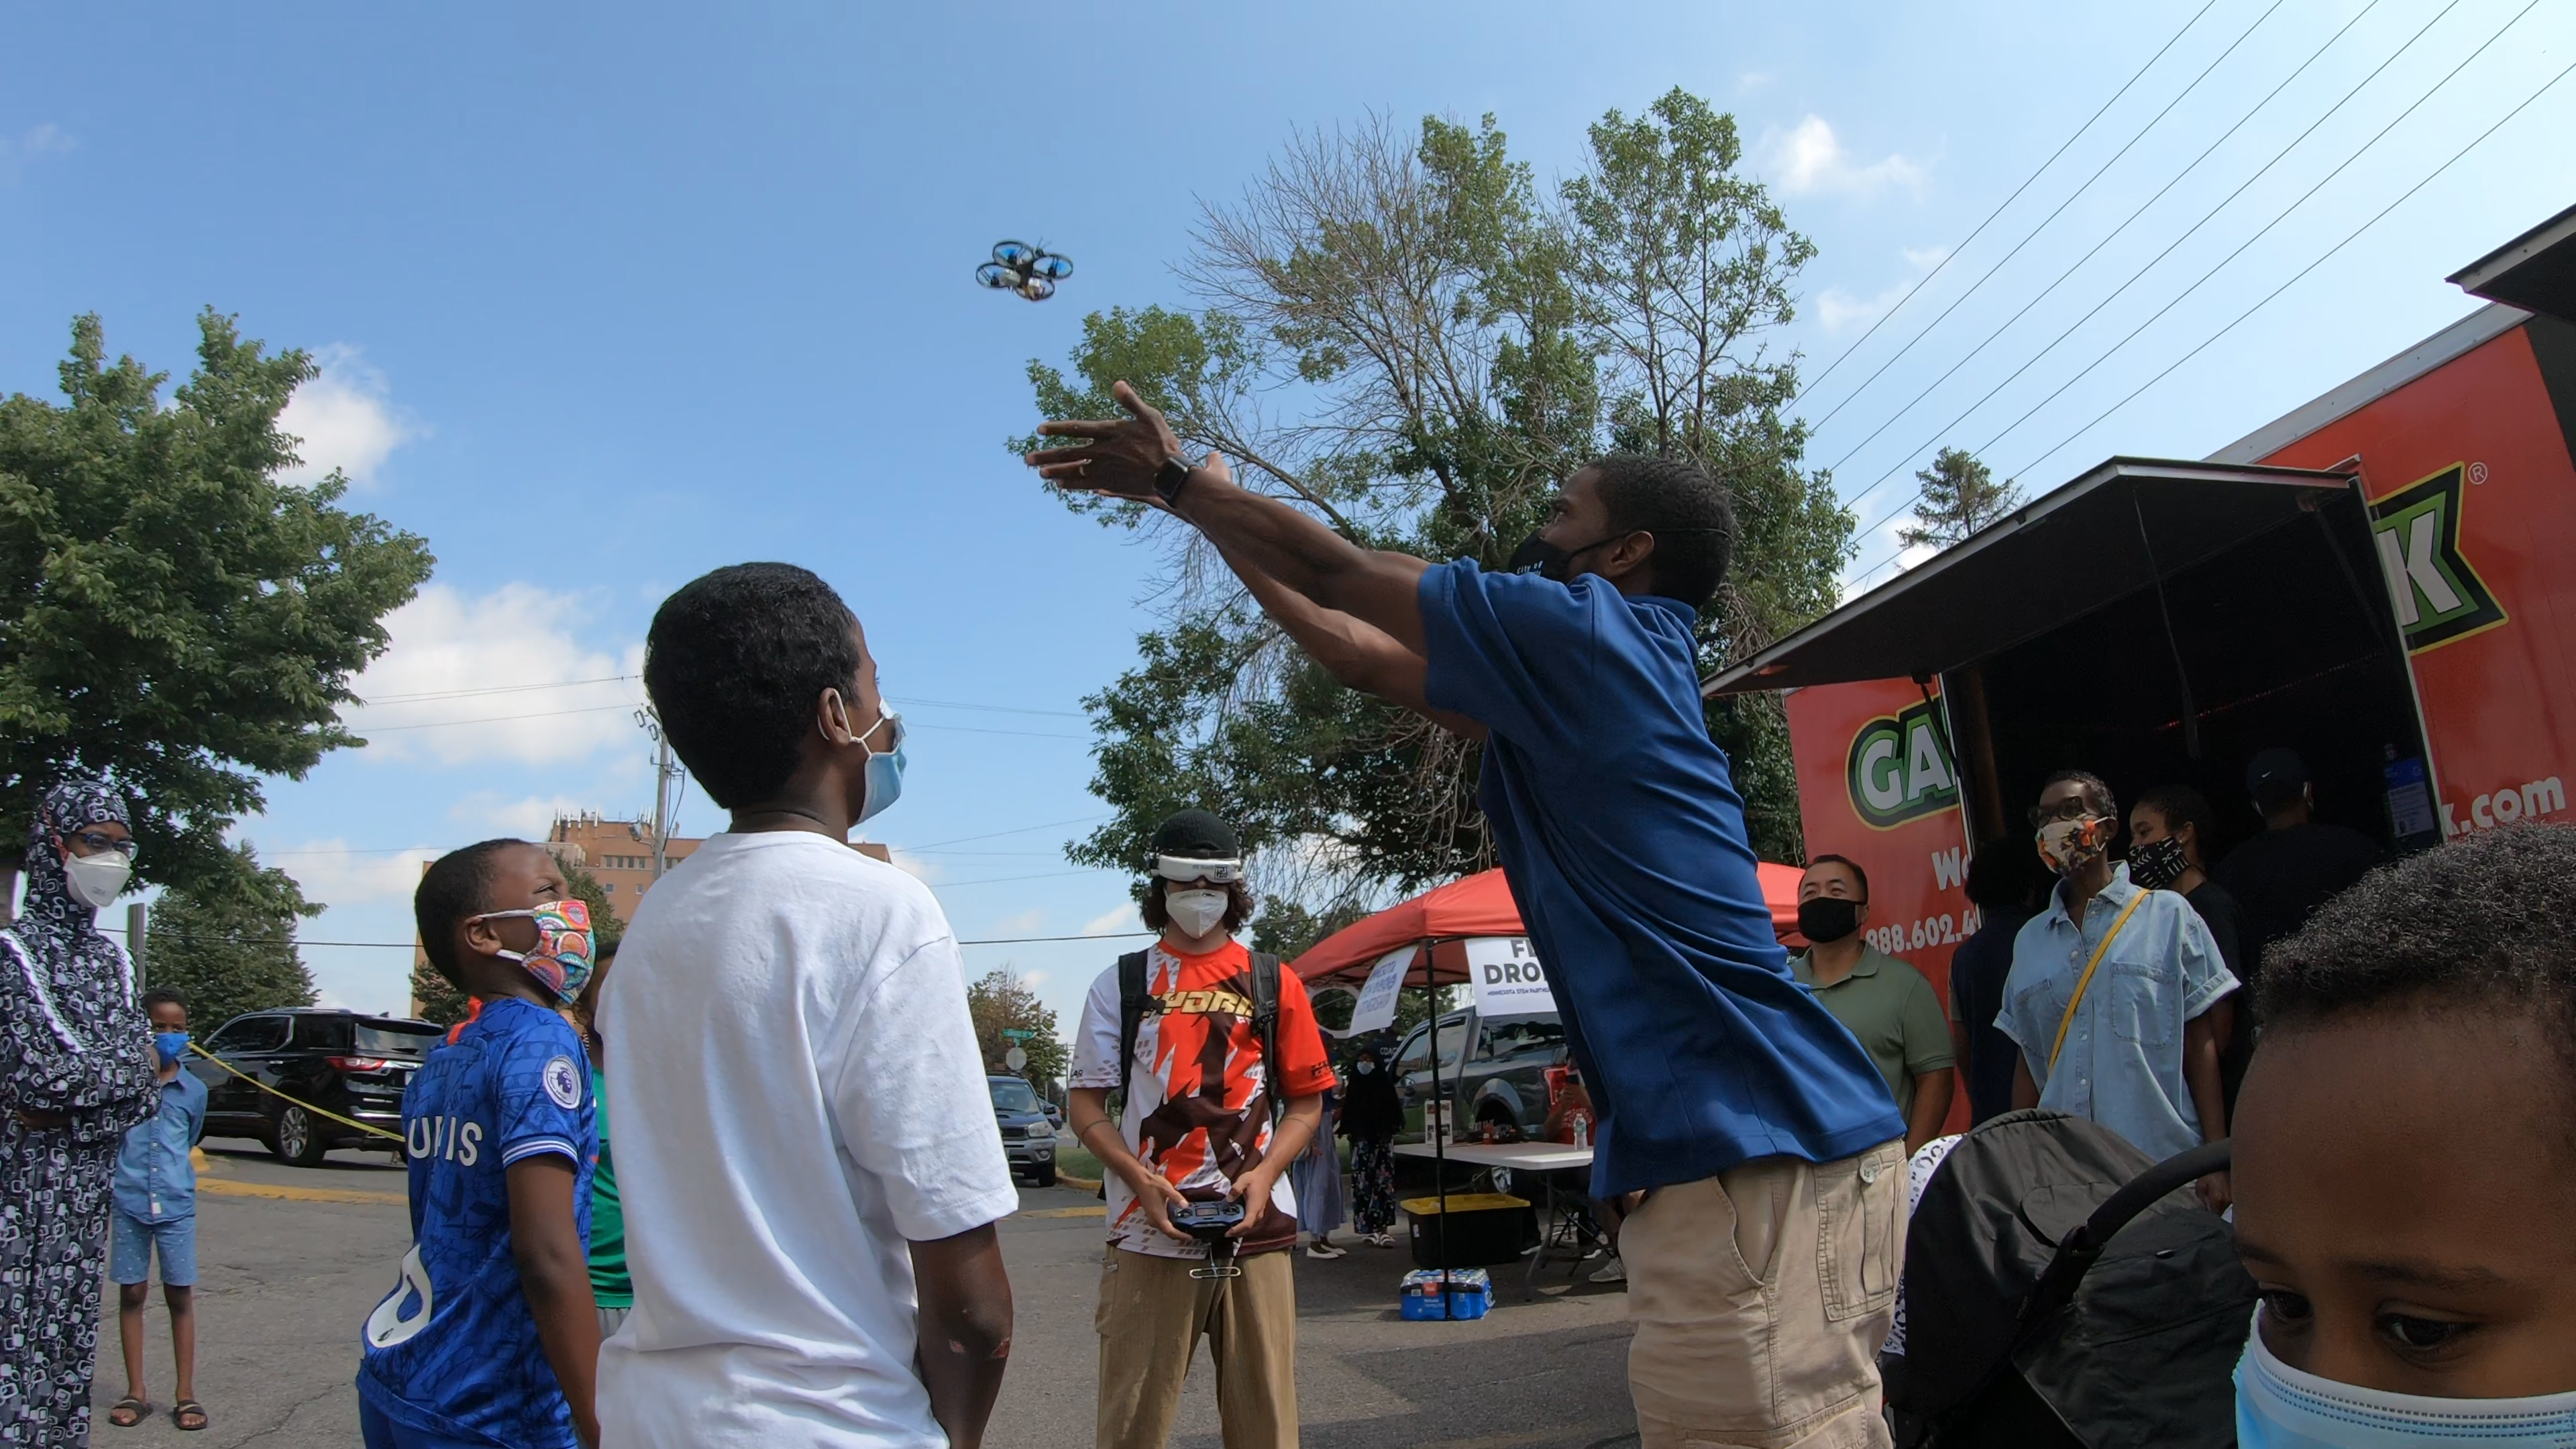 Mayor Carter launches a drone with students